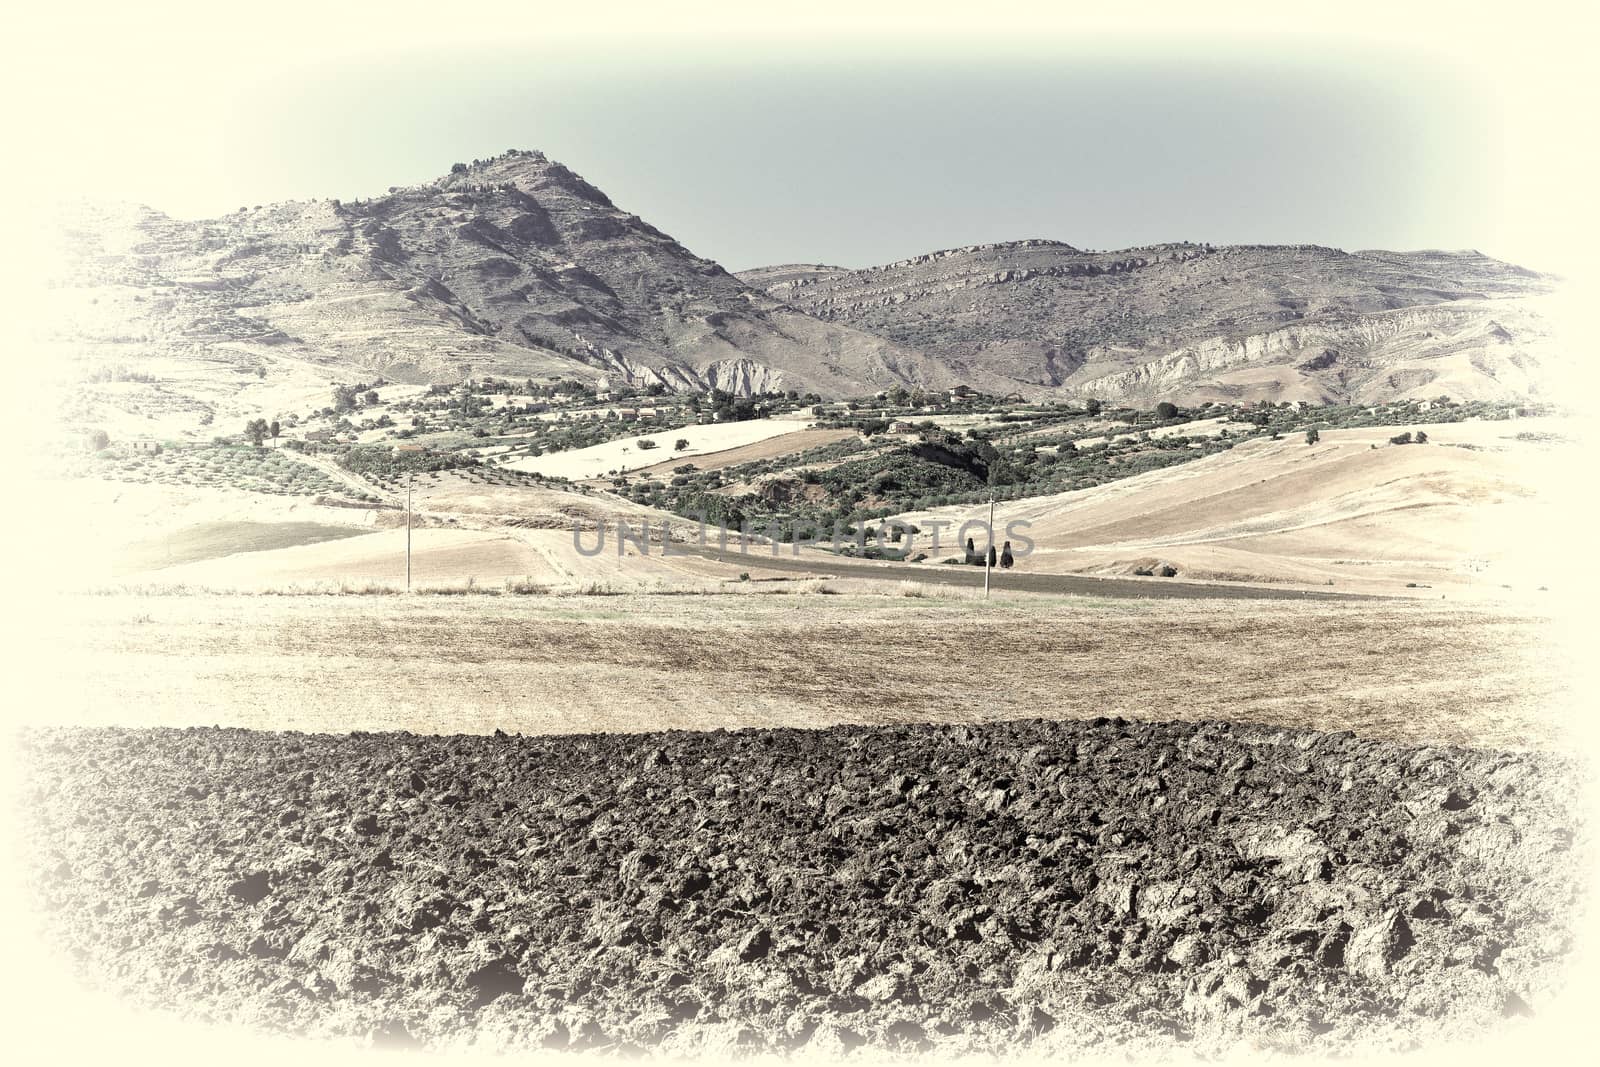 Hills of Sicily by gkuna